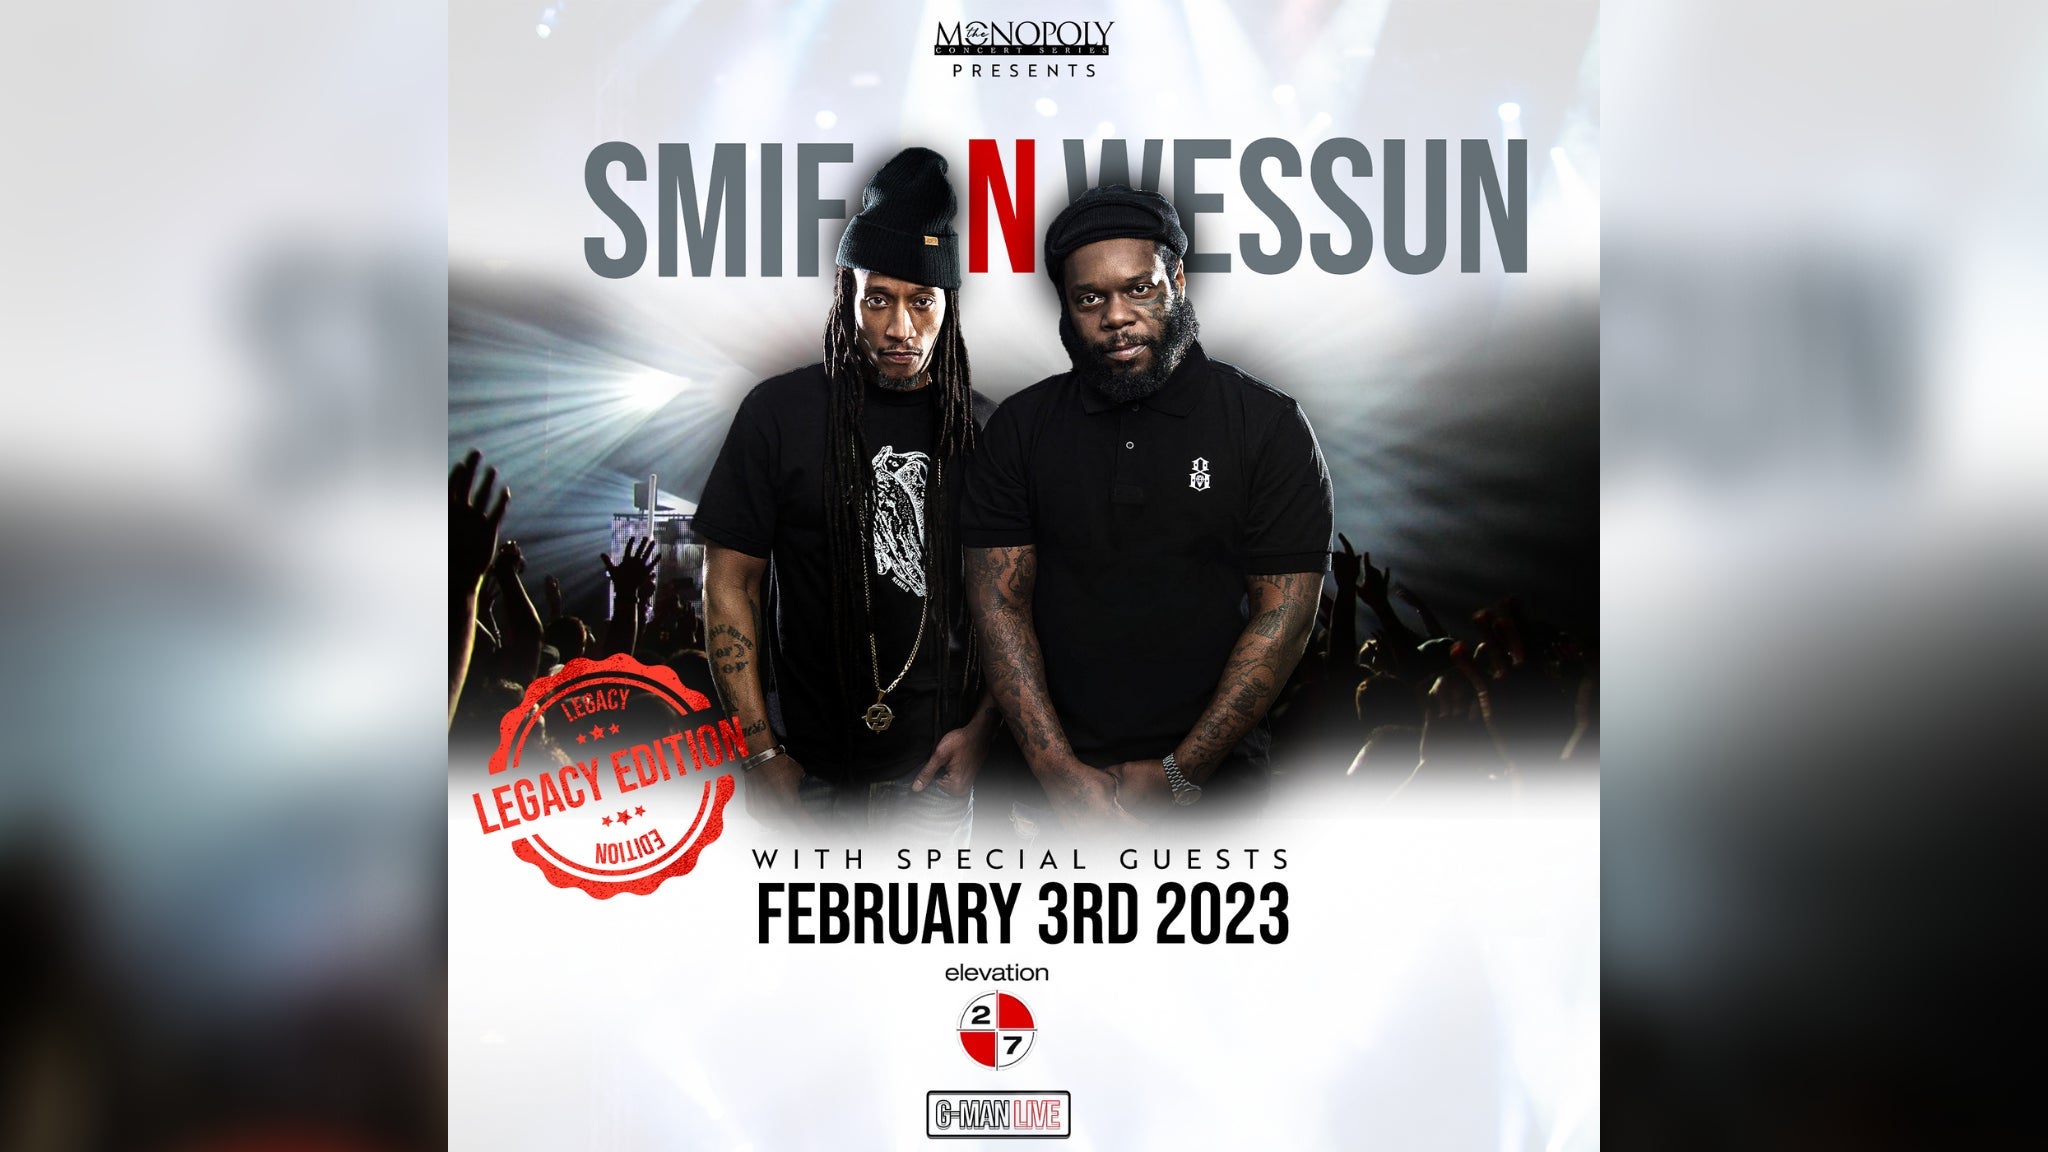 G-Man Live Presents Smif N Wessun at Elevation 27